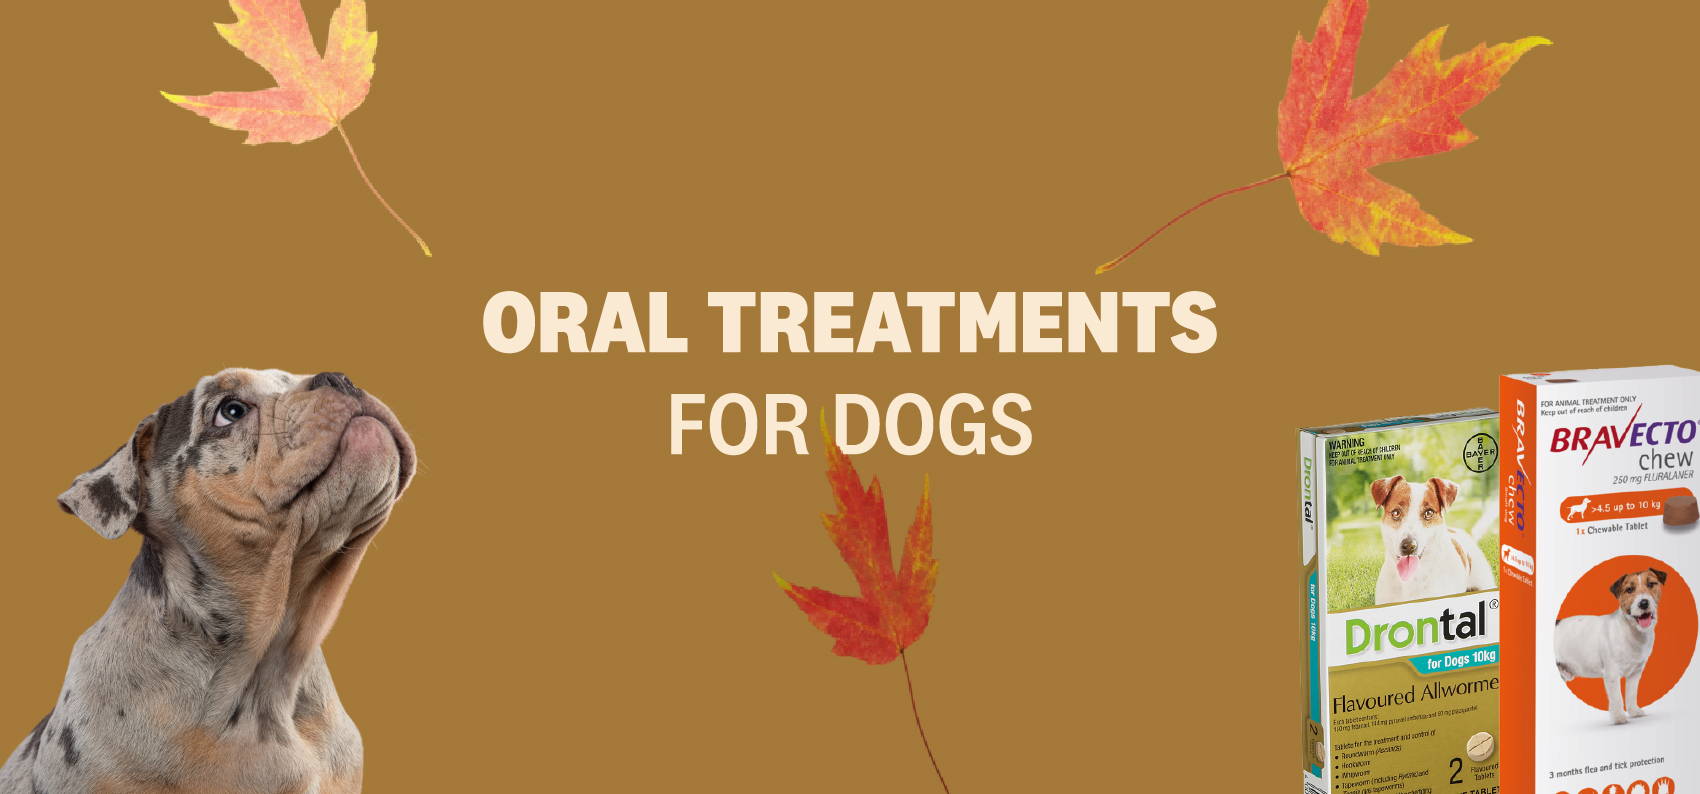 ORAL TREATMENTS FOR DOGS